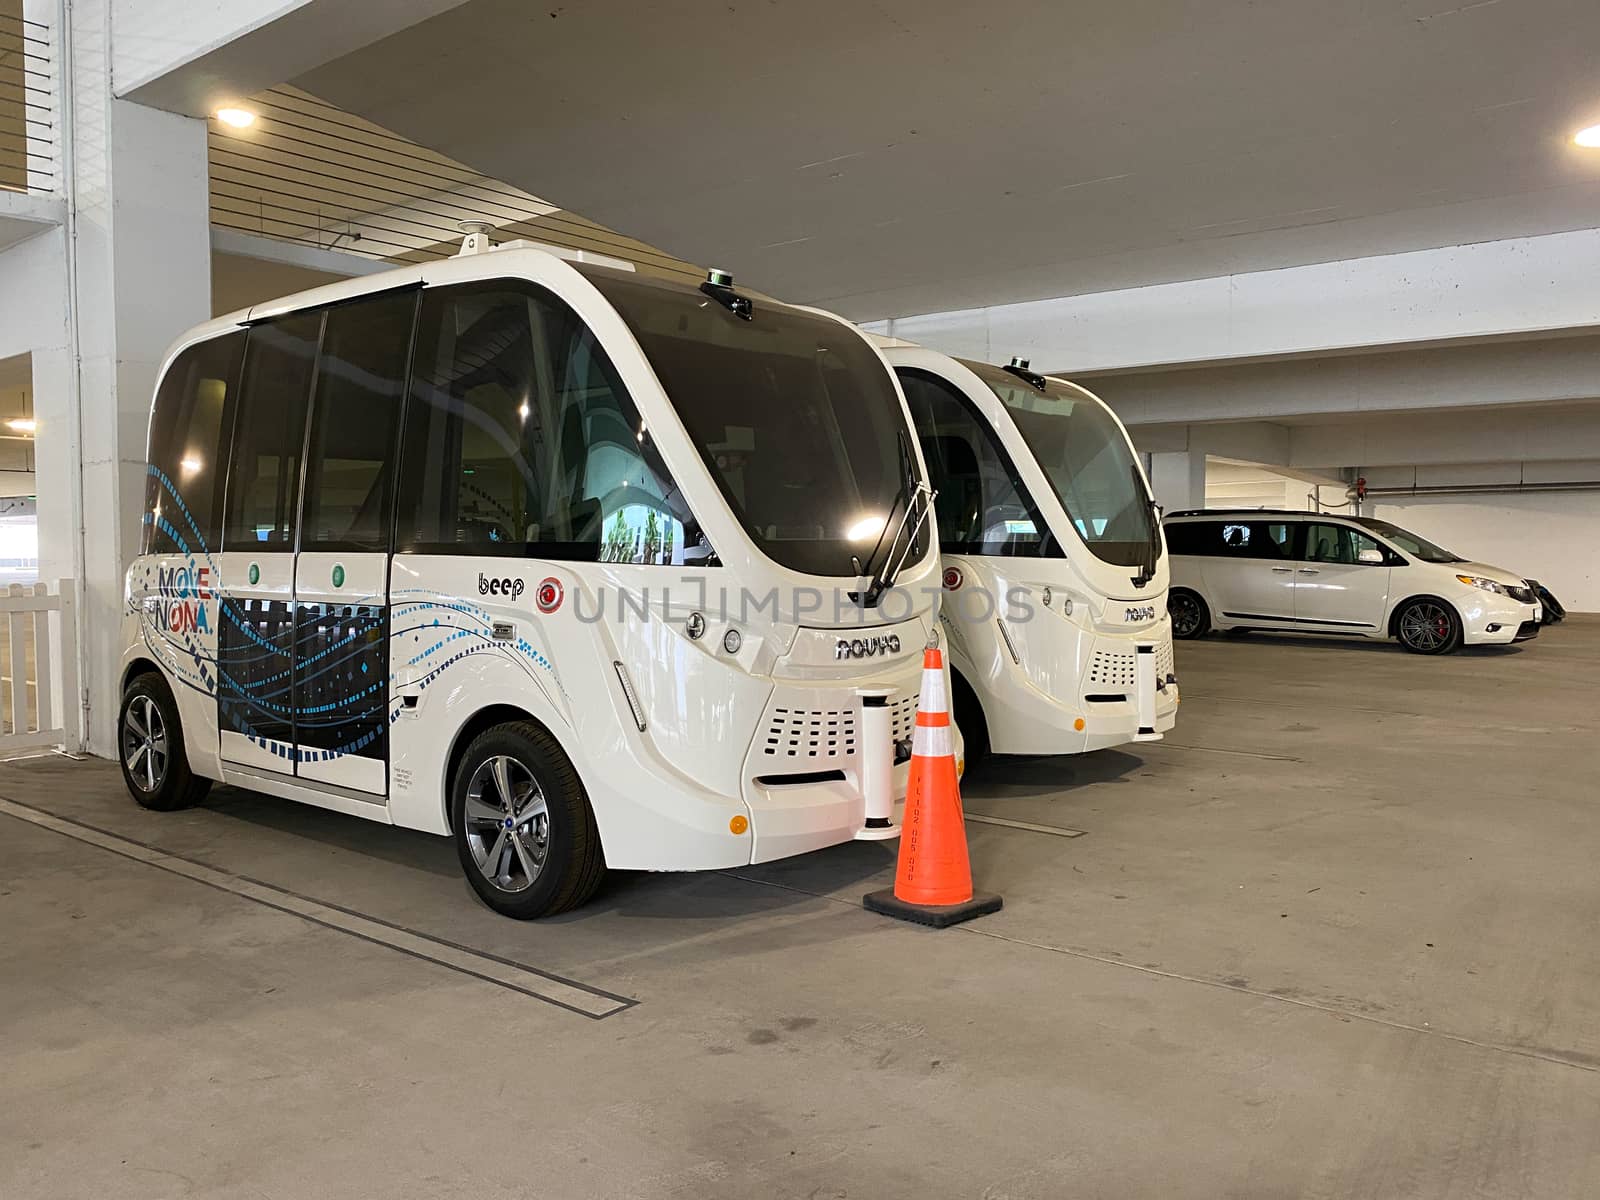 Orlando, FL/USA-4/10/20: Beep shuttles in a parking garage in Laureate Park, Lake Nona, Orlando, FL.   Beep is a shared mobility shuttle that is driverless and autonomous developed by NAVYA.